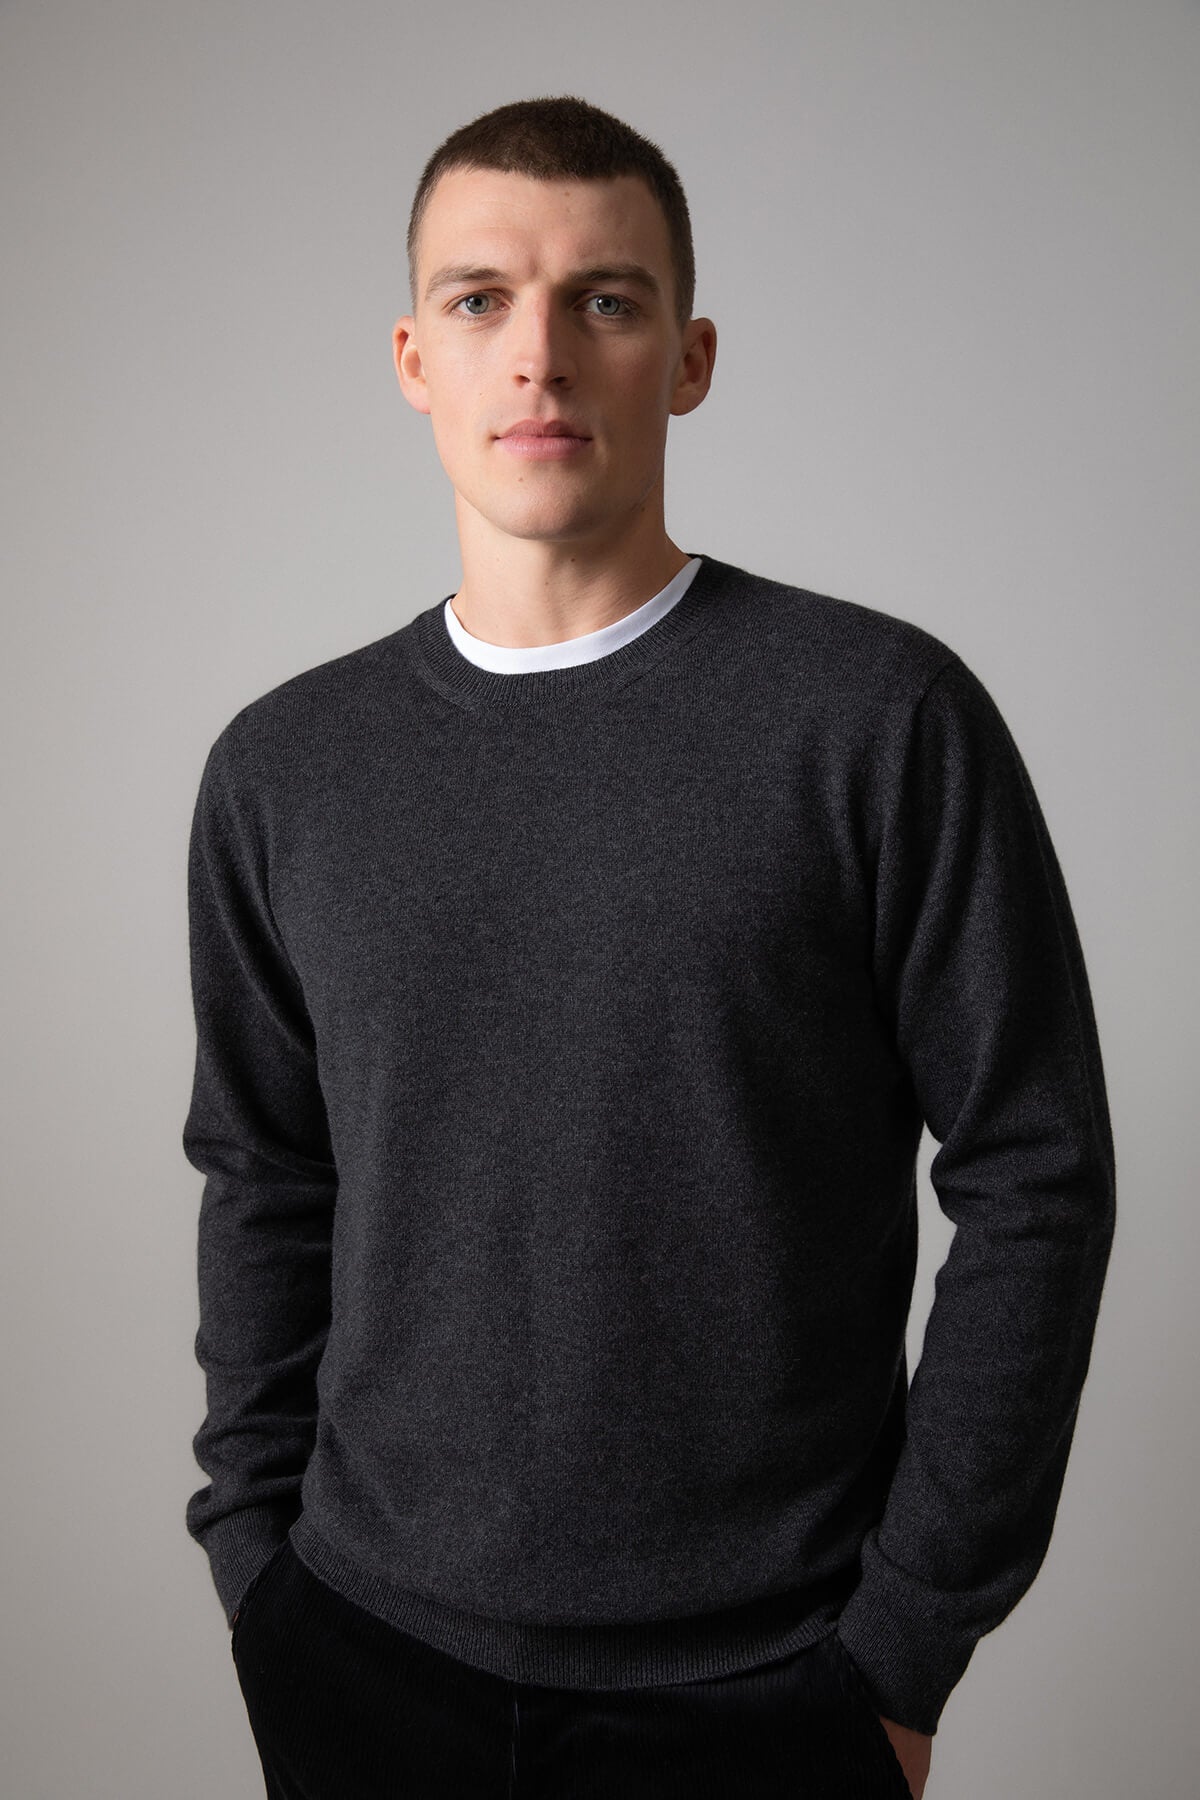 Johnstons of Elgin Men’s Cashmere Round Neck Jumper in Charcoal grey on model wearing black trousers on grey background KAI05117HA7165